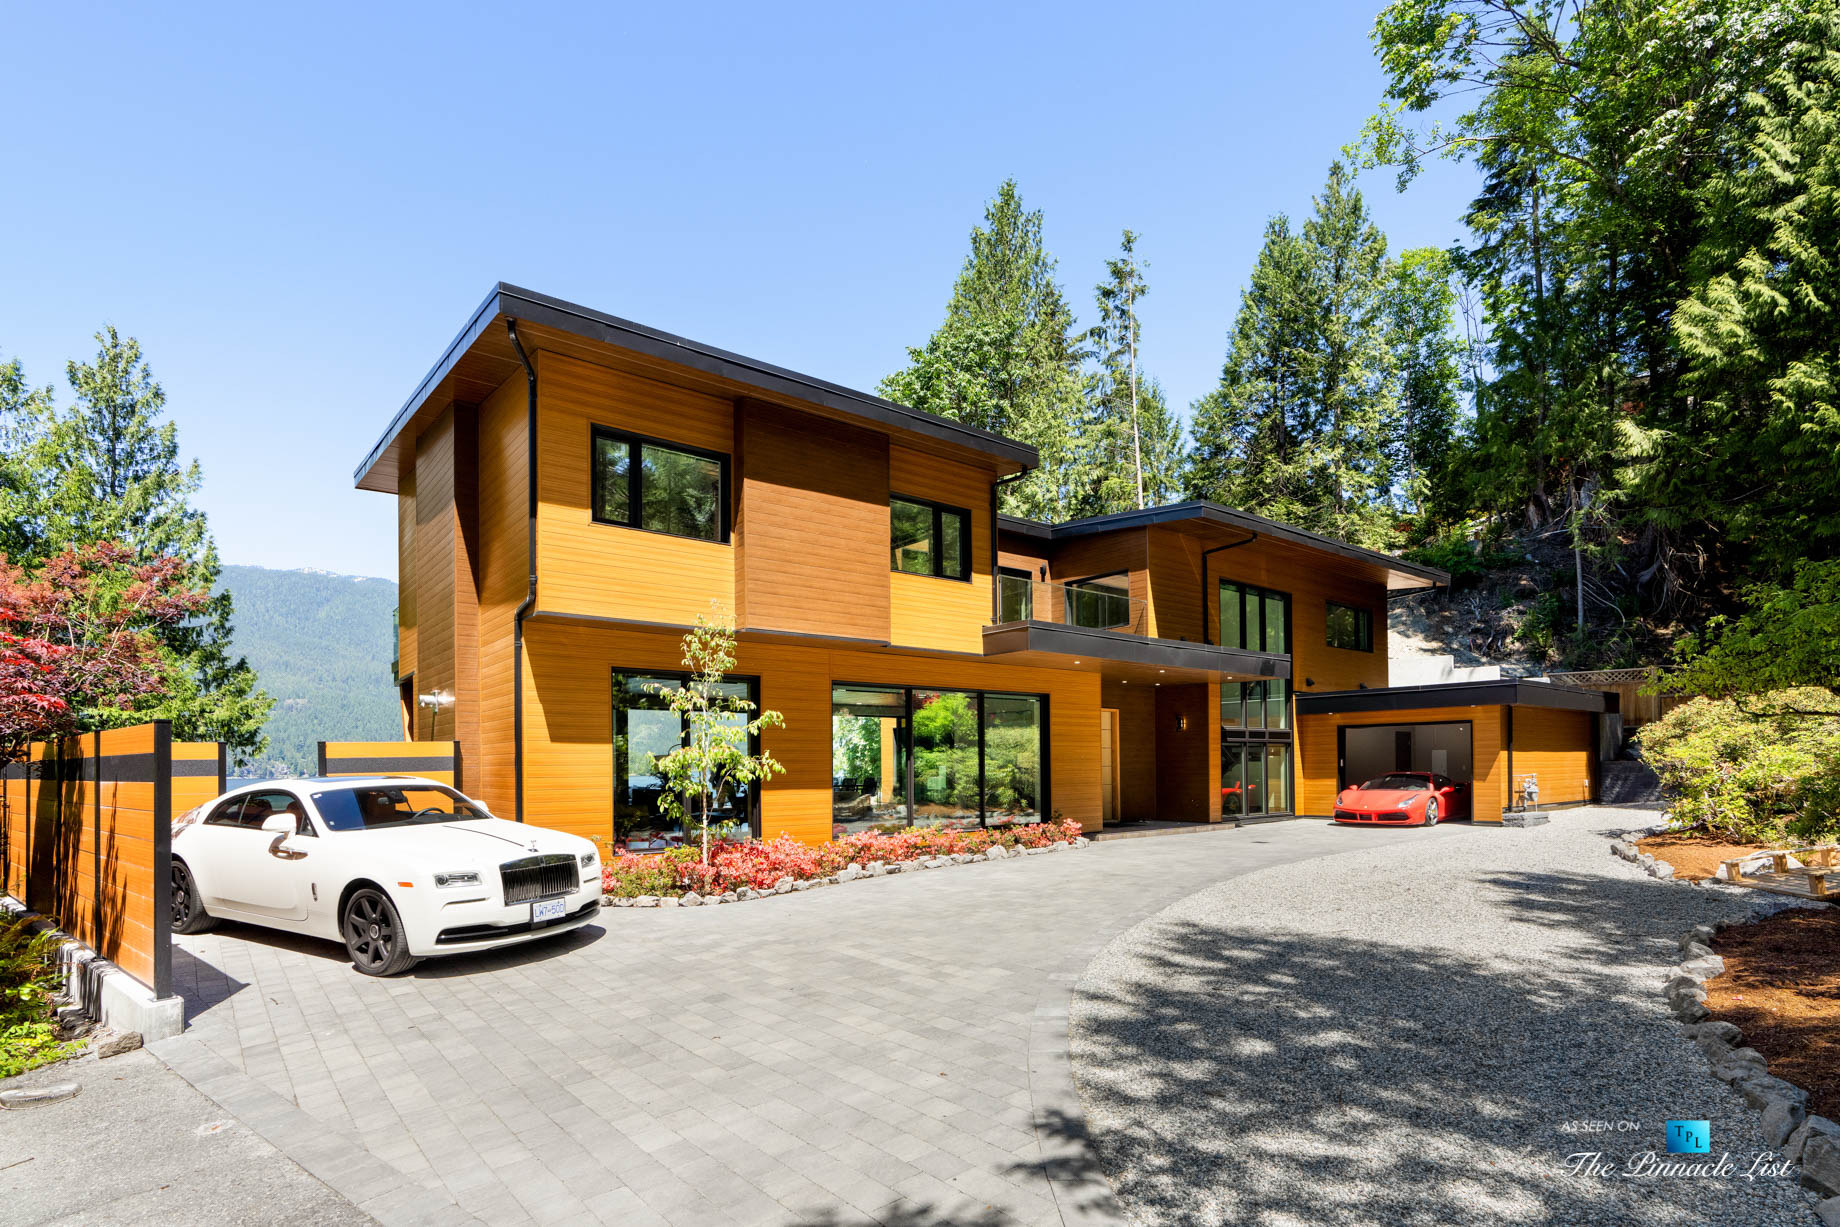 3350 Watson Rd, Belcarra, BC, Canada - Vancouver Luxury Real Estate - Modern Oceanfront Architectural Home with White Rolls-Royce and Red Ferrari